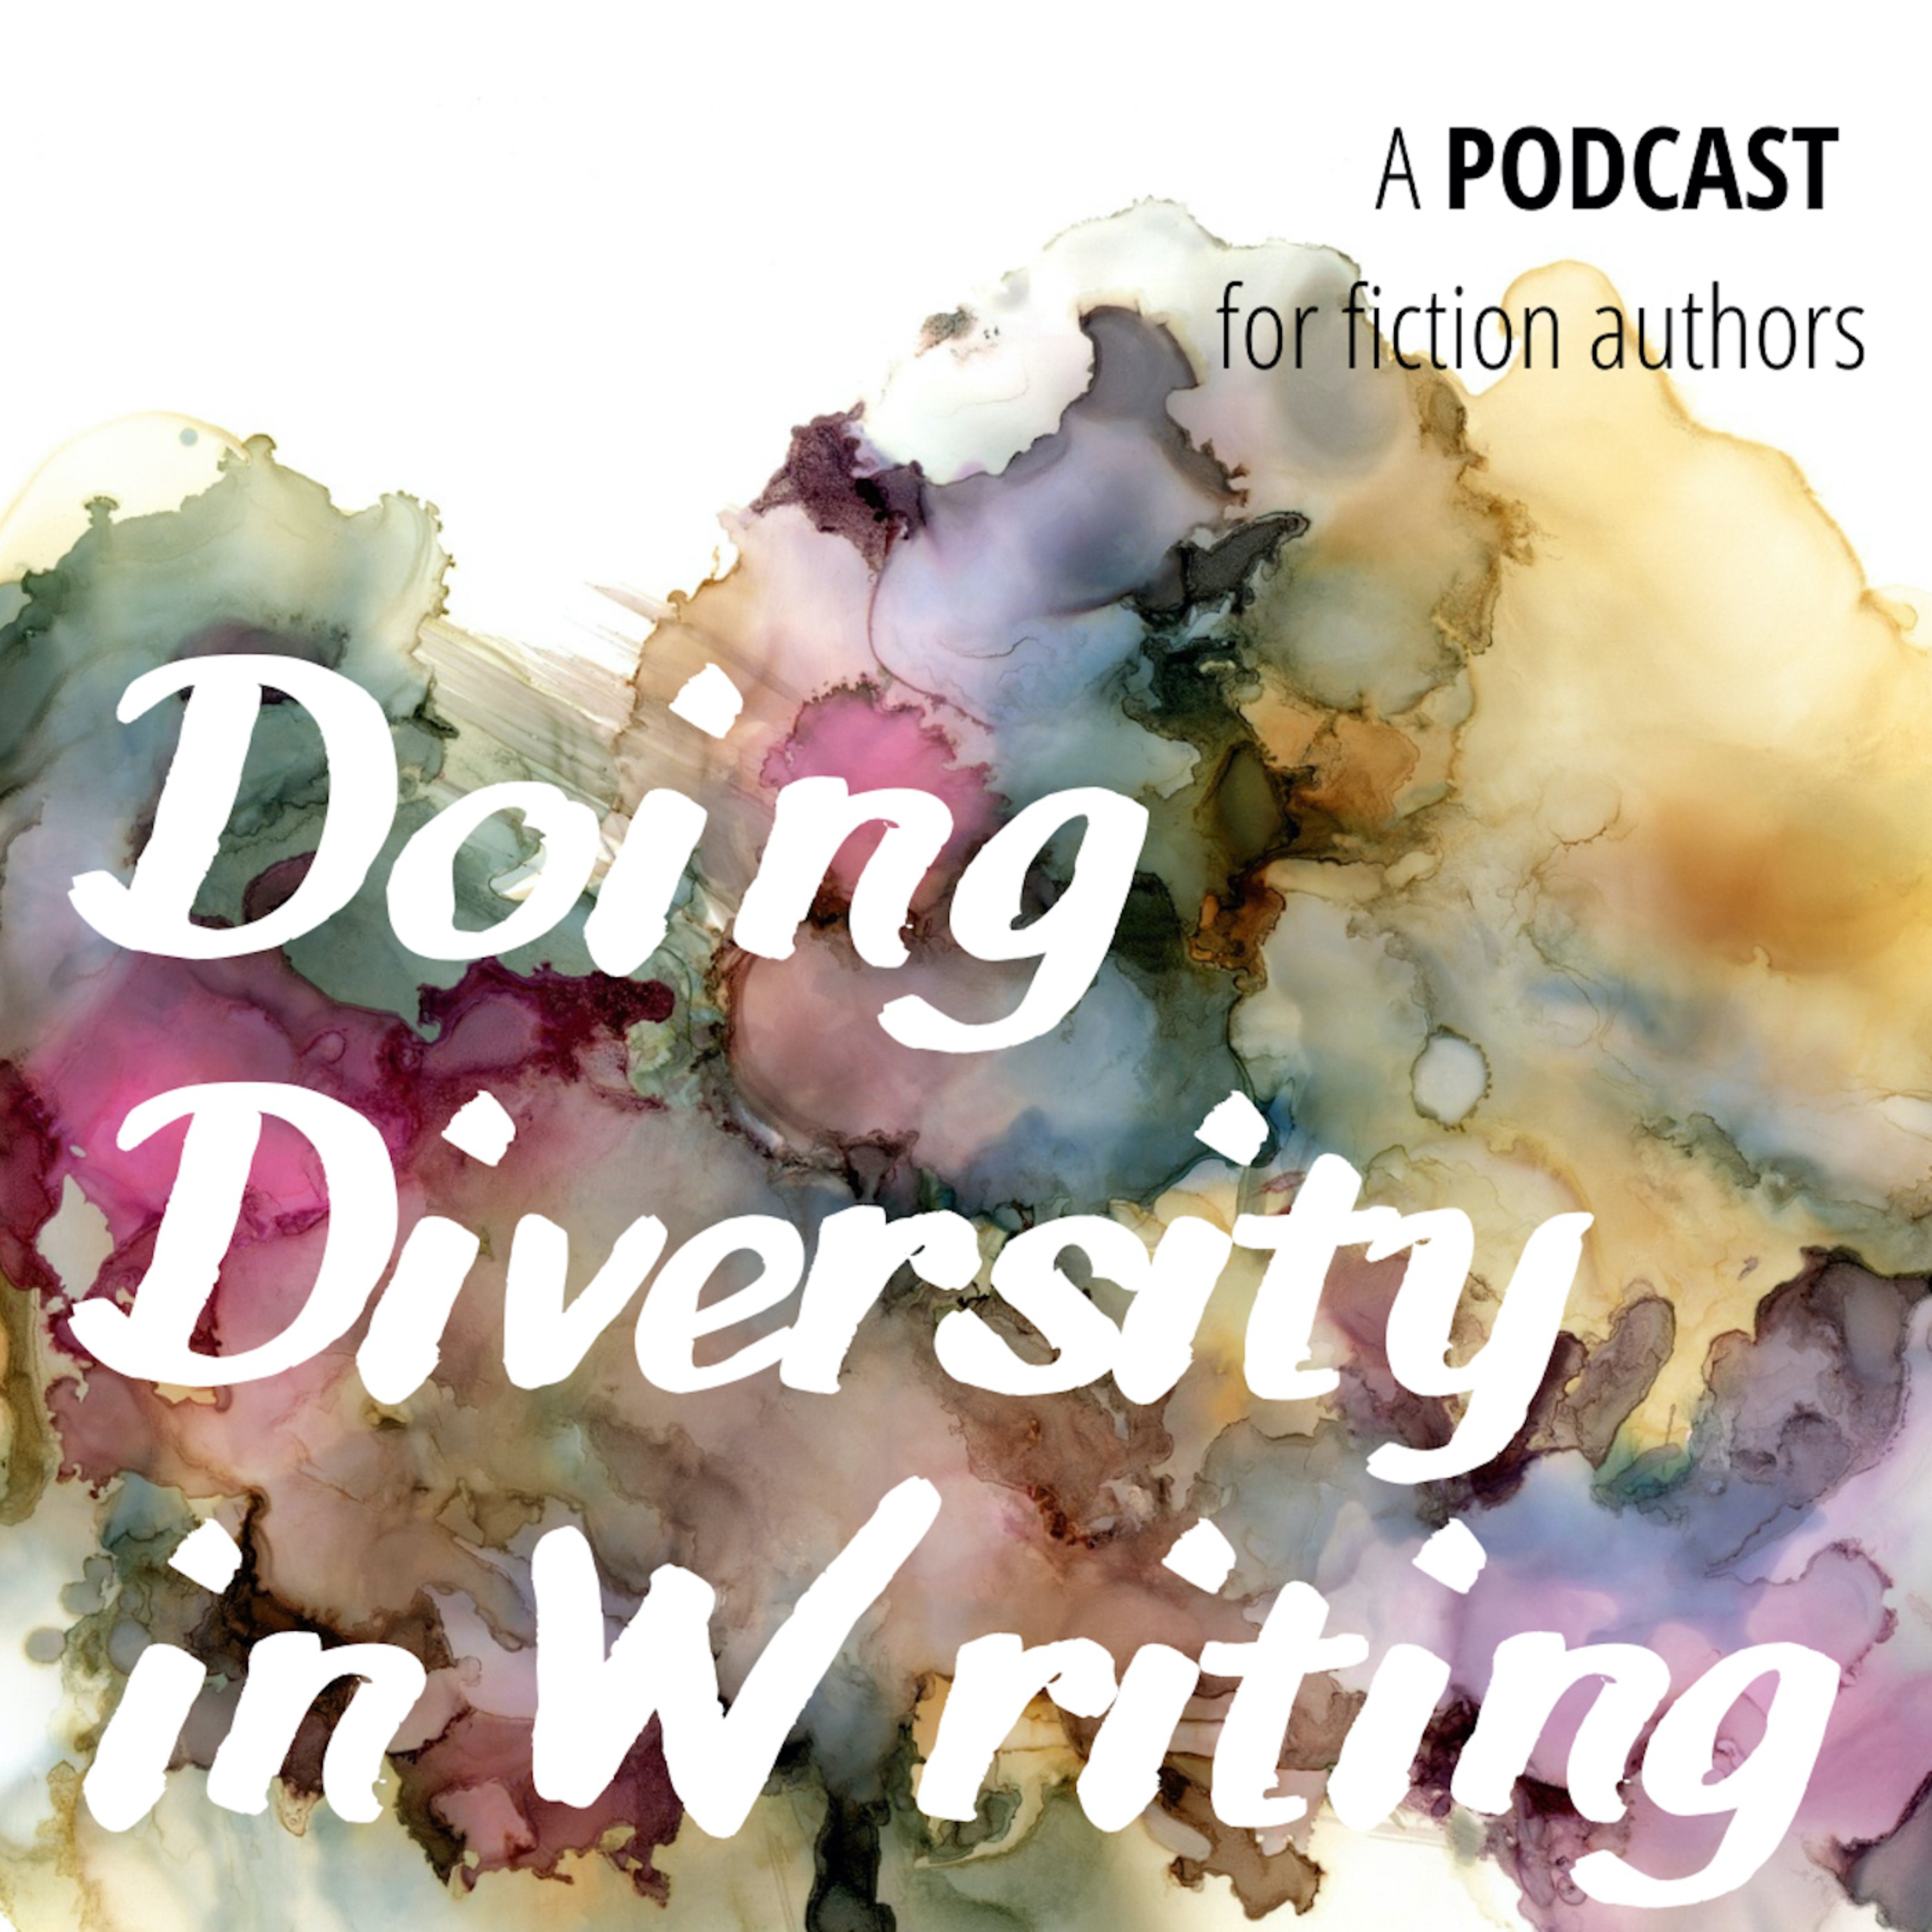 Doing Diversity in Writing